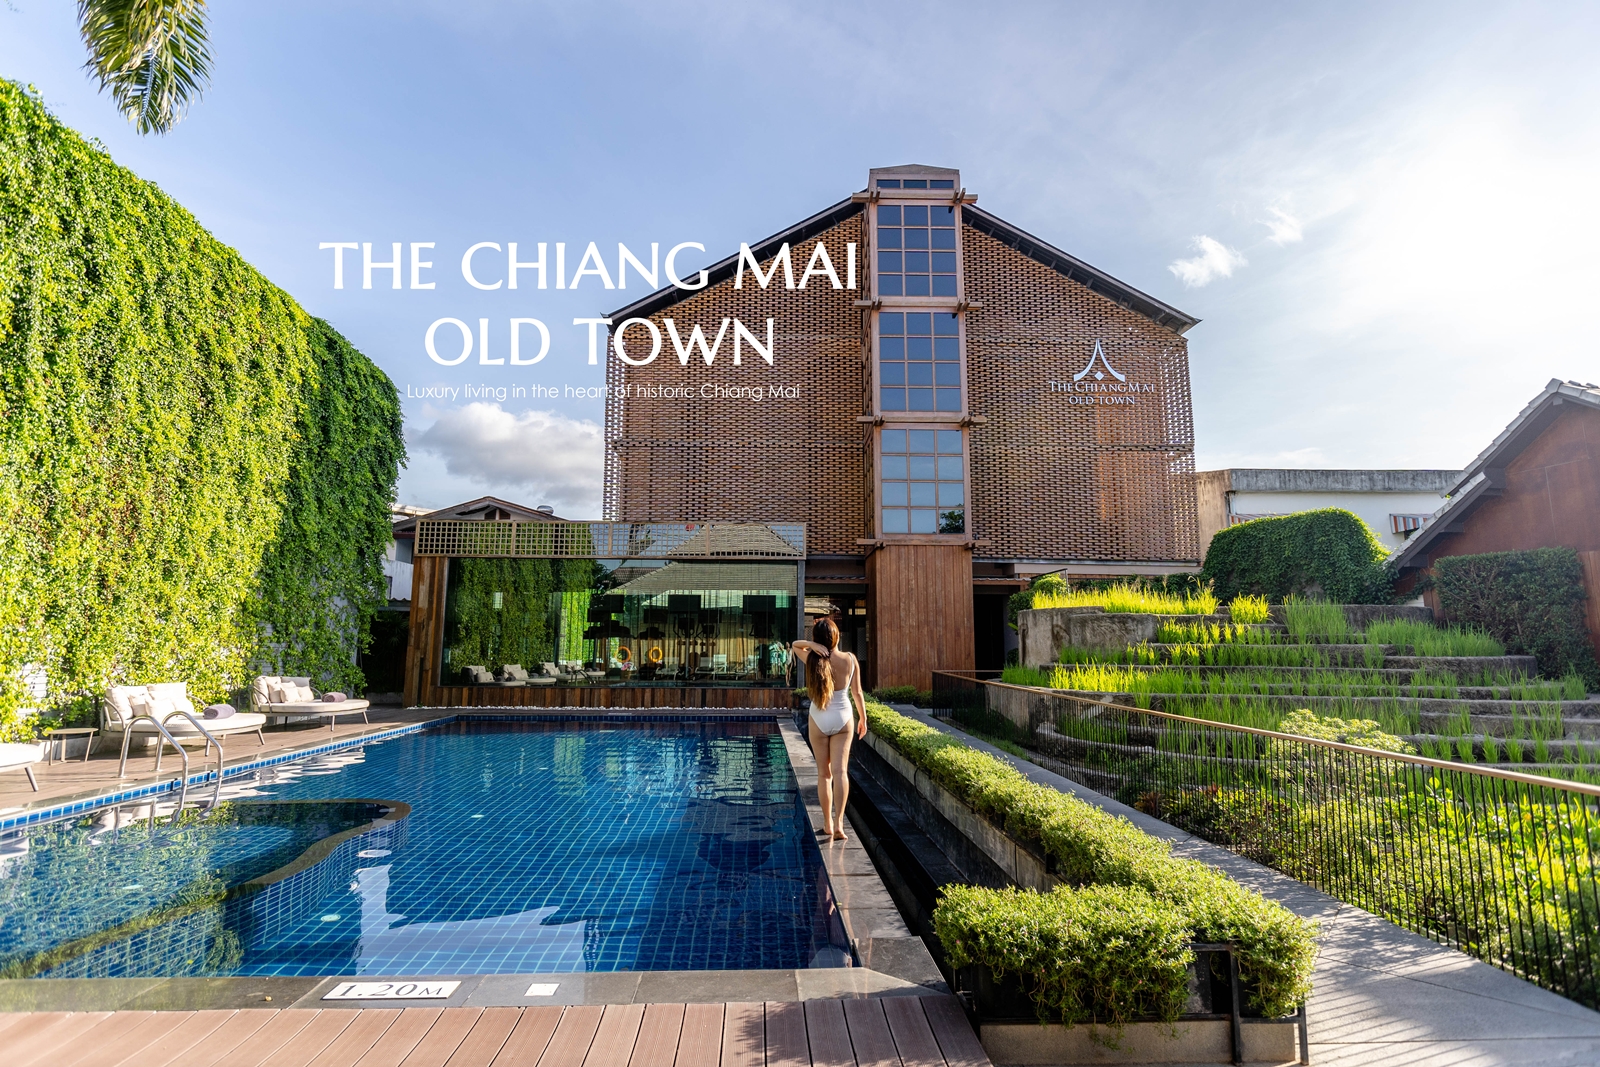 https://thechiangmai.com/oldtown/hotel-and-resort-thailand/